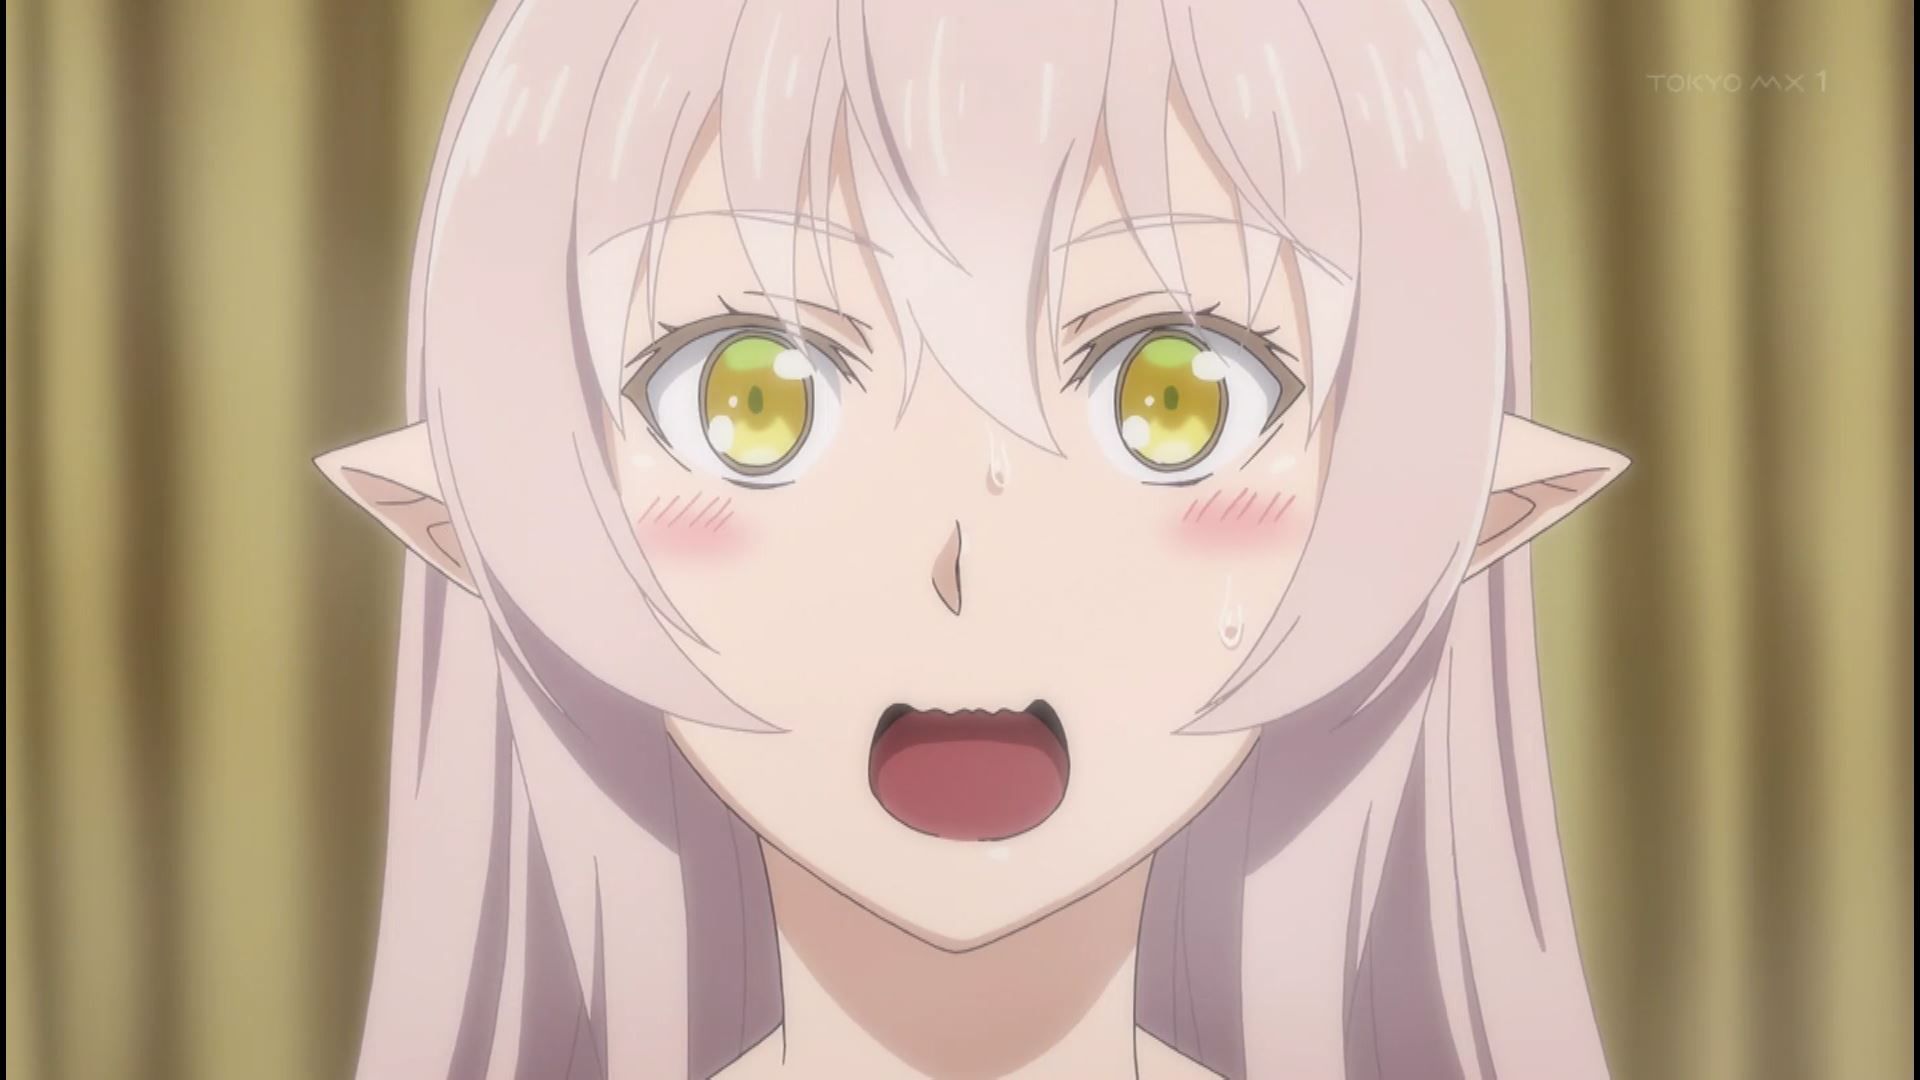 In episode 6 of the anime "Skeleton Knight, I'm Going Out to Another World" a girl takes off her clothes and looks completely naked and erotic 18